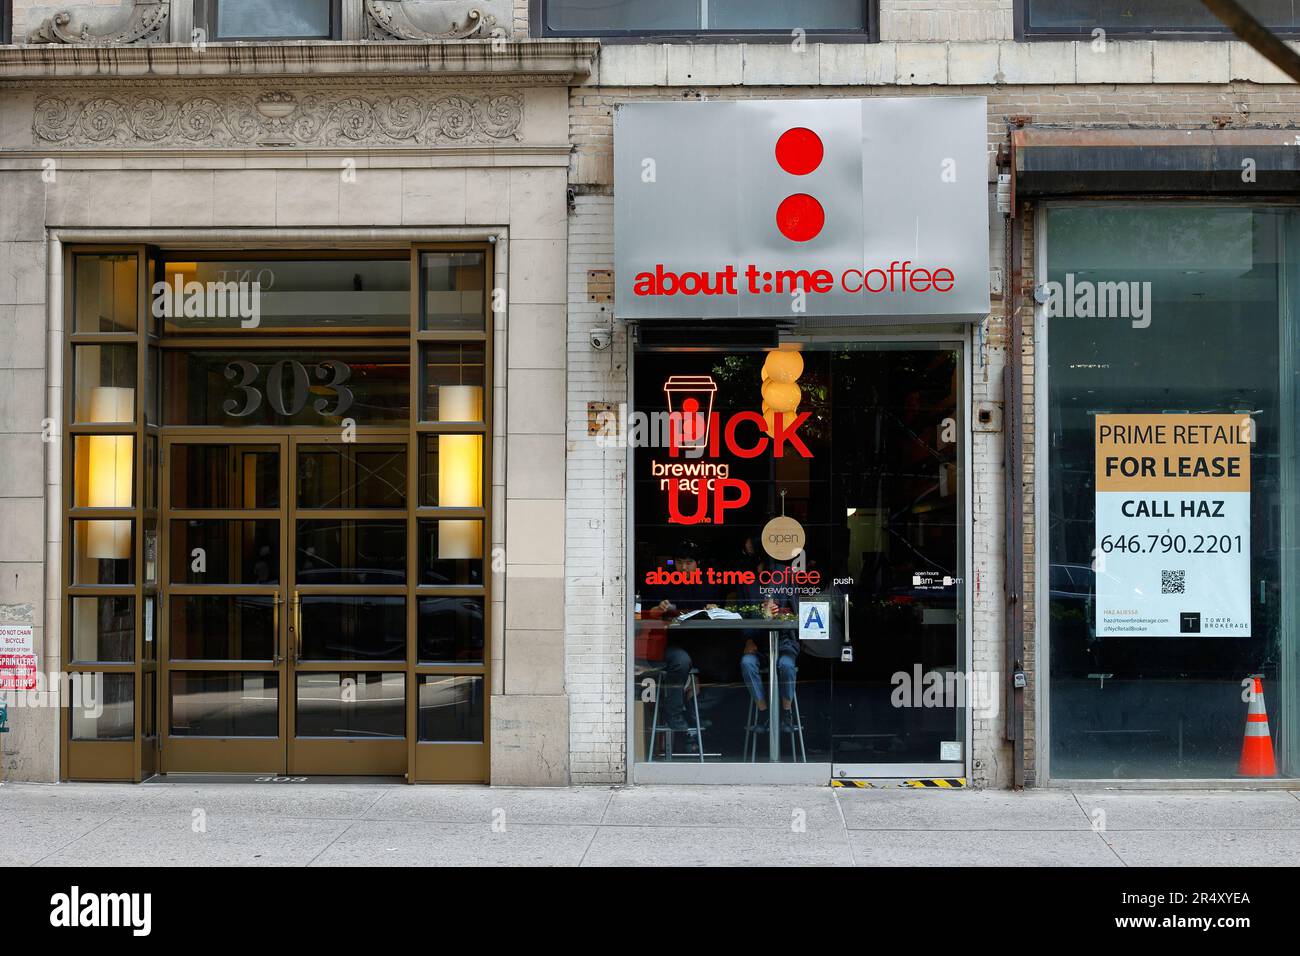 About Time Coffee, 303 Park Ave S, New York, NYC storefront photo of a venture capital backed, app based coffee shop in Manhattan. Stock Photo